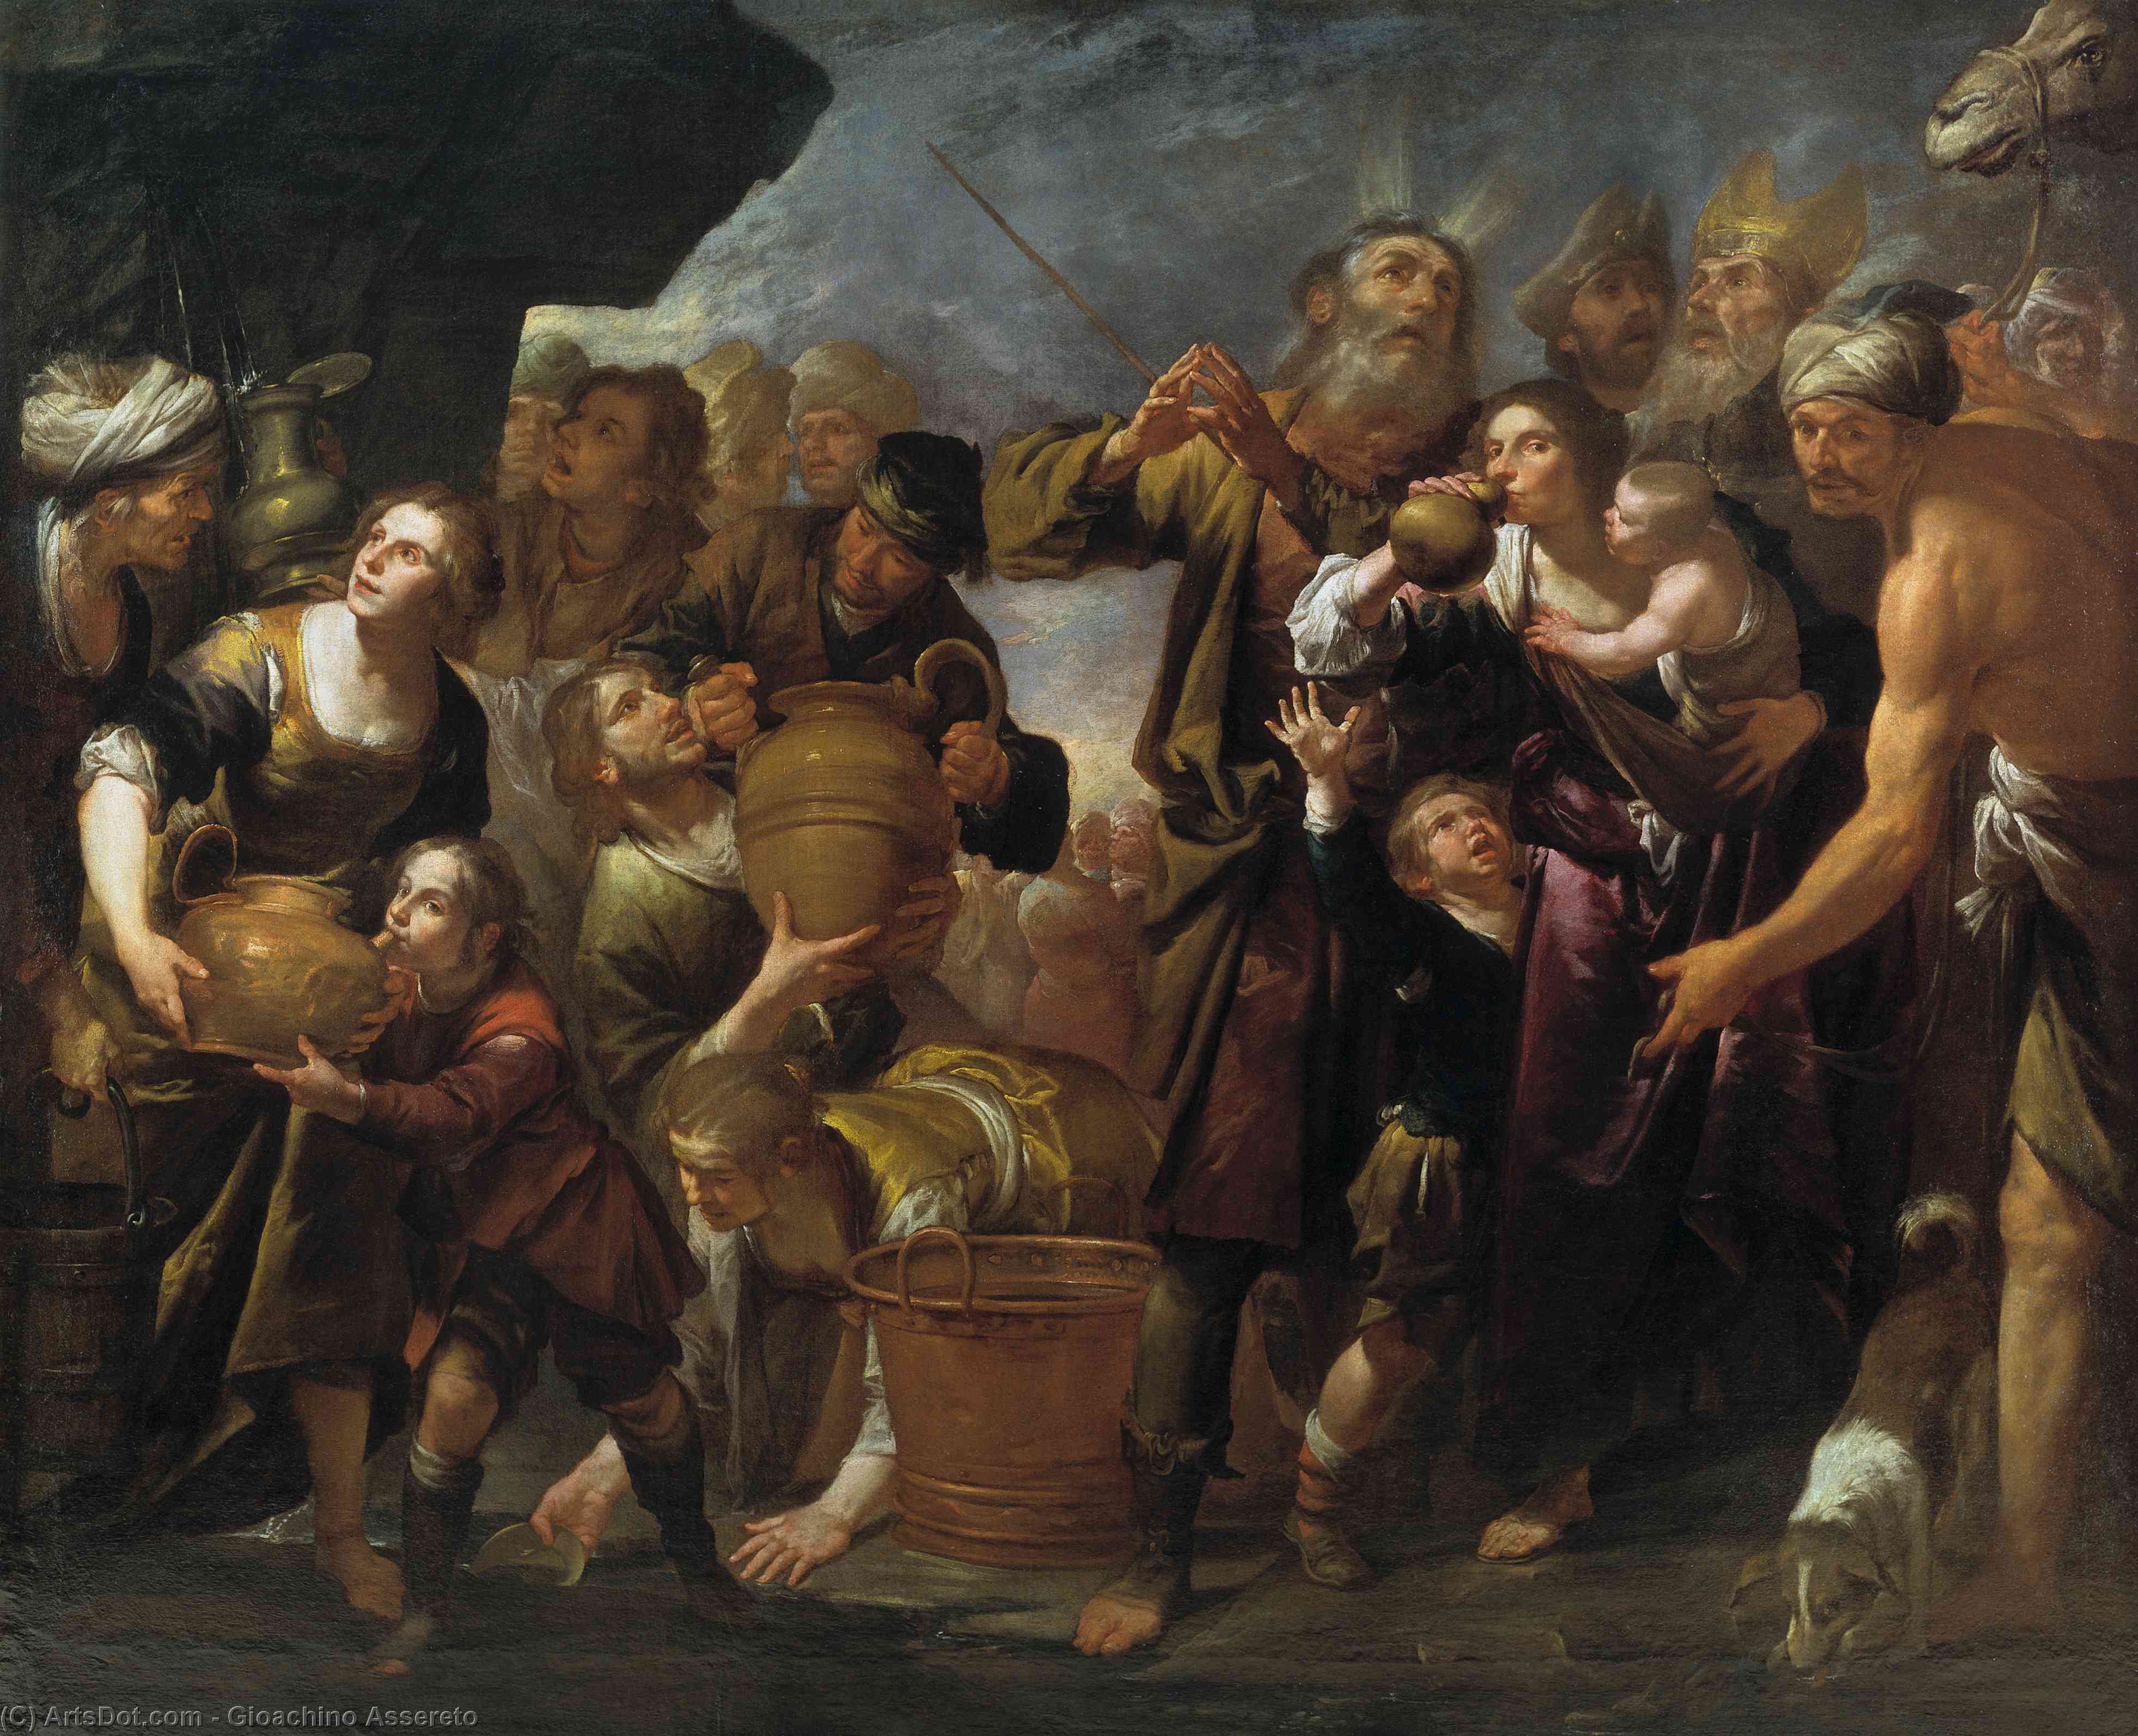 WikiOO.org - Encyclopedia of Fine Arts - Målning, konstverk Gioacchino Assereto - Moses and the water from the stone